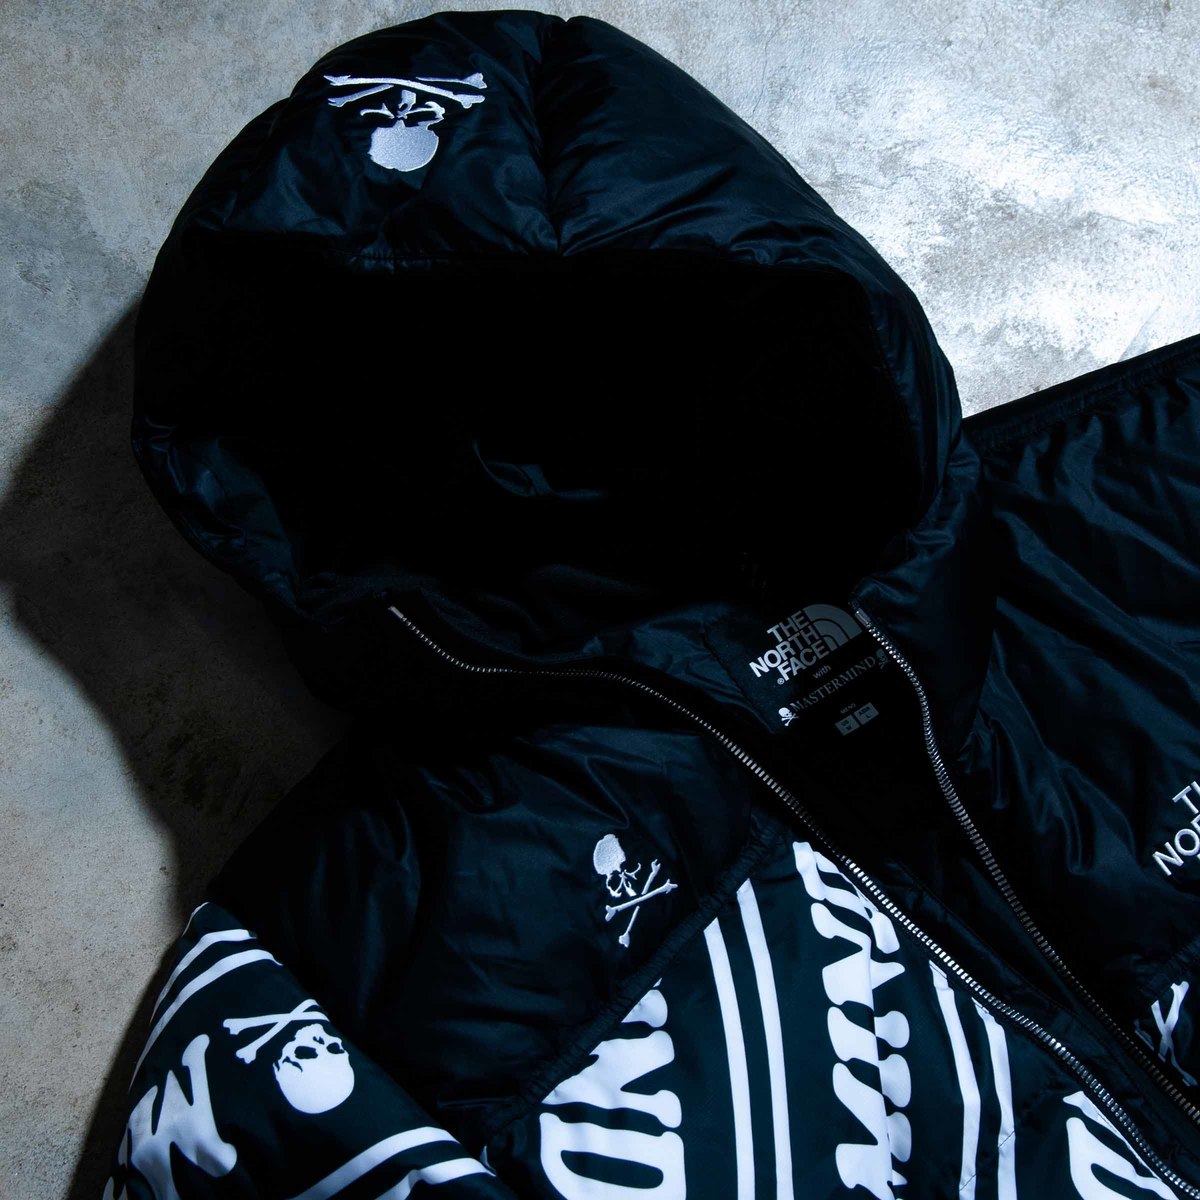 The North Face Join Mastermind In Second Collaboration